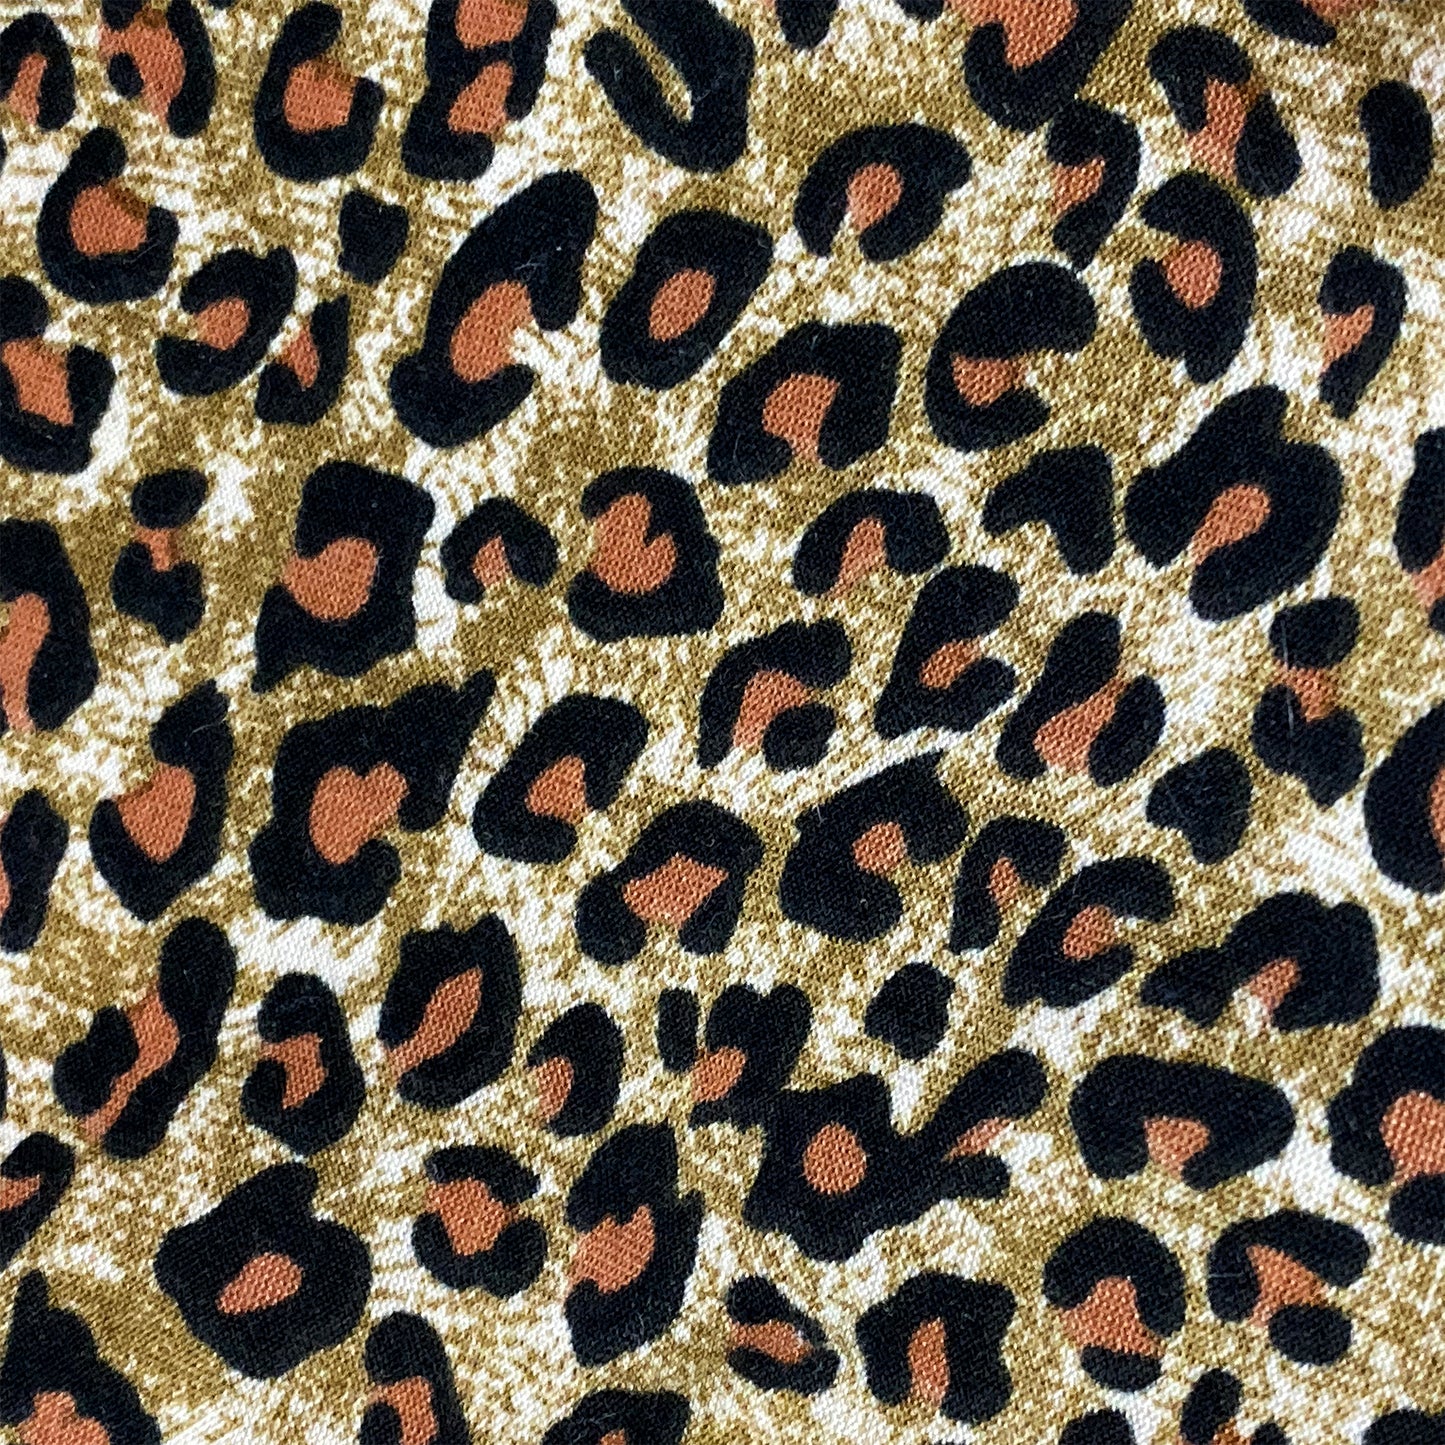 Panther Print Cotton Hosiery Fabric